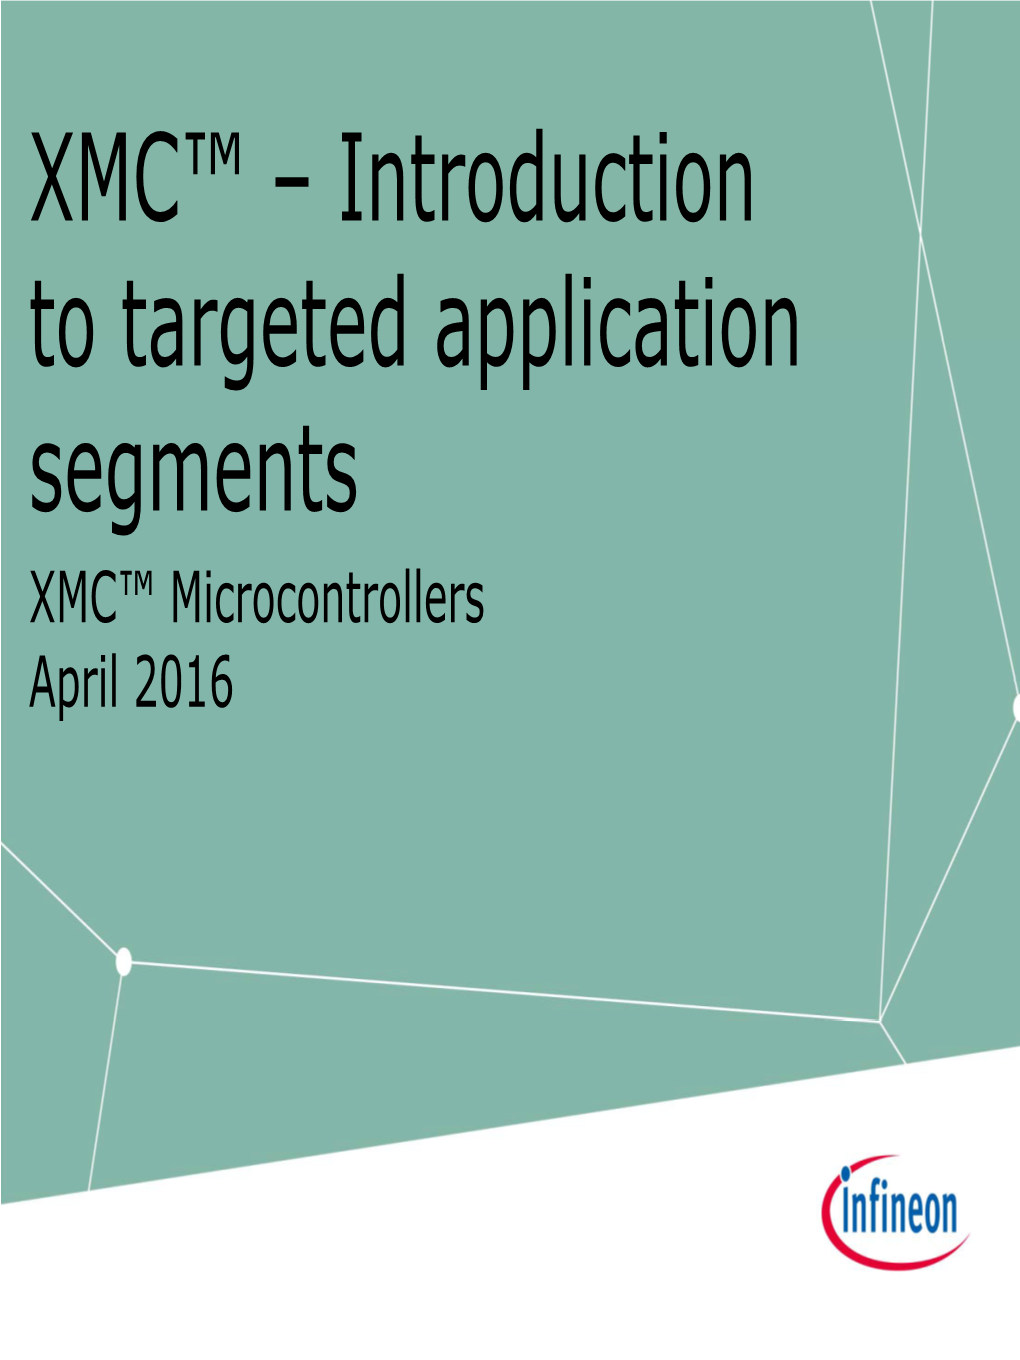 XMC™ – Introduction to Targeted Application Segments XMC™ Microcontrollers April 2016 Agenda